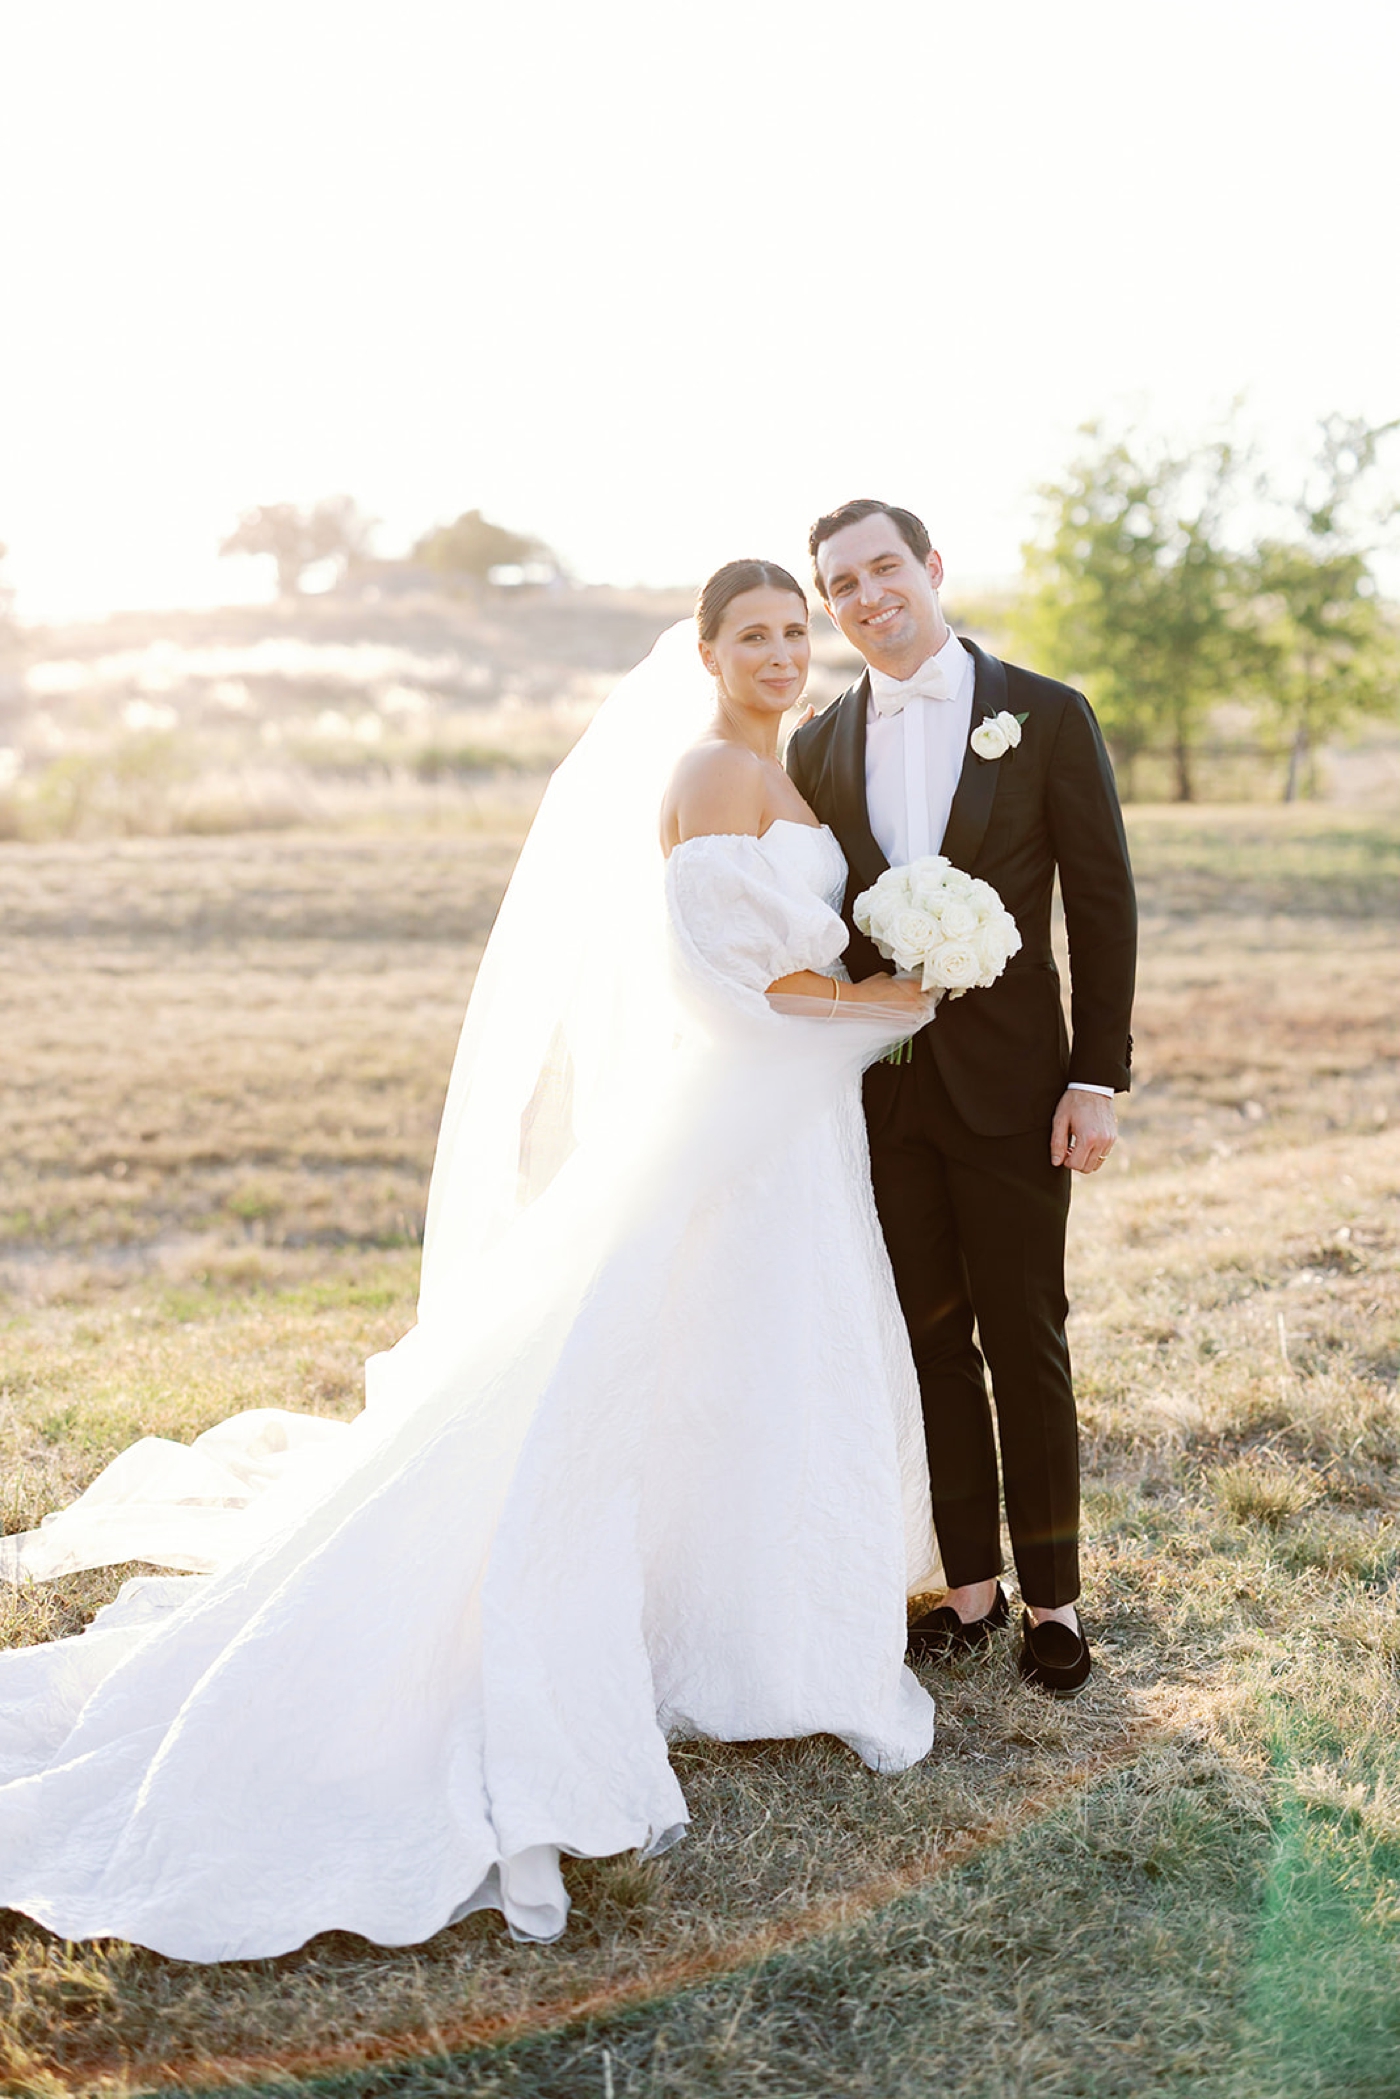 Sunset bride and groom pictures, with the groom in a classic tuxedo and the bride in an embroidered ballgown